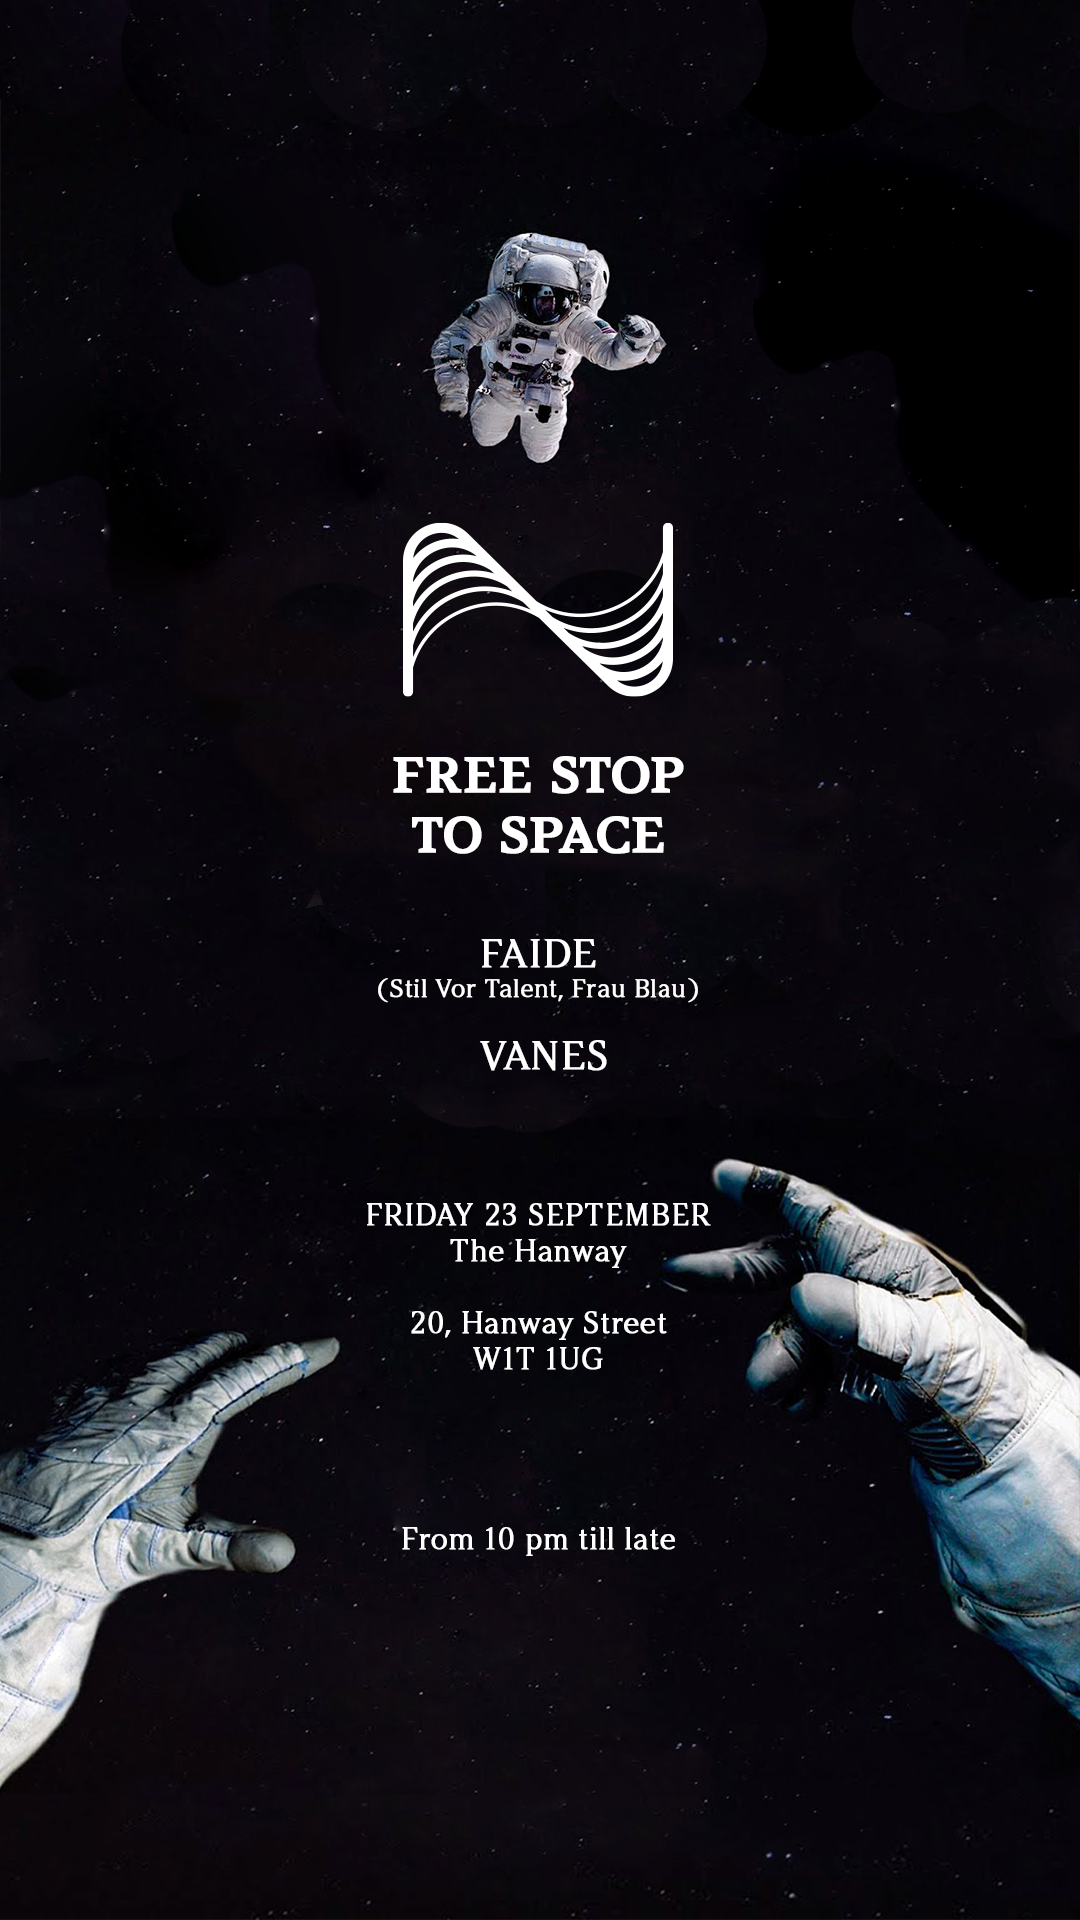 Free stop to space - Flyer front